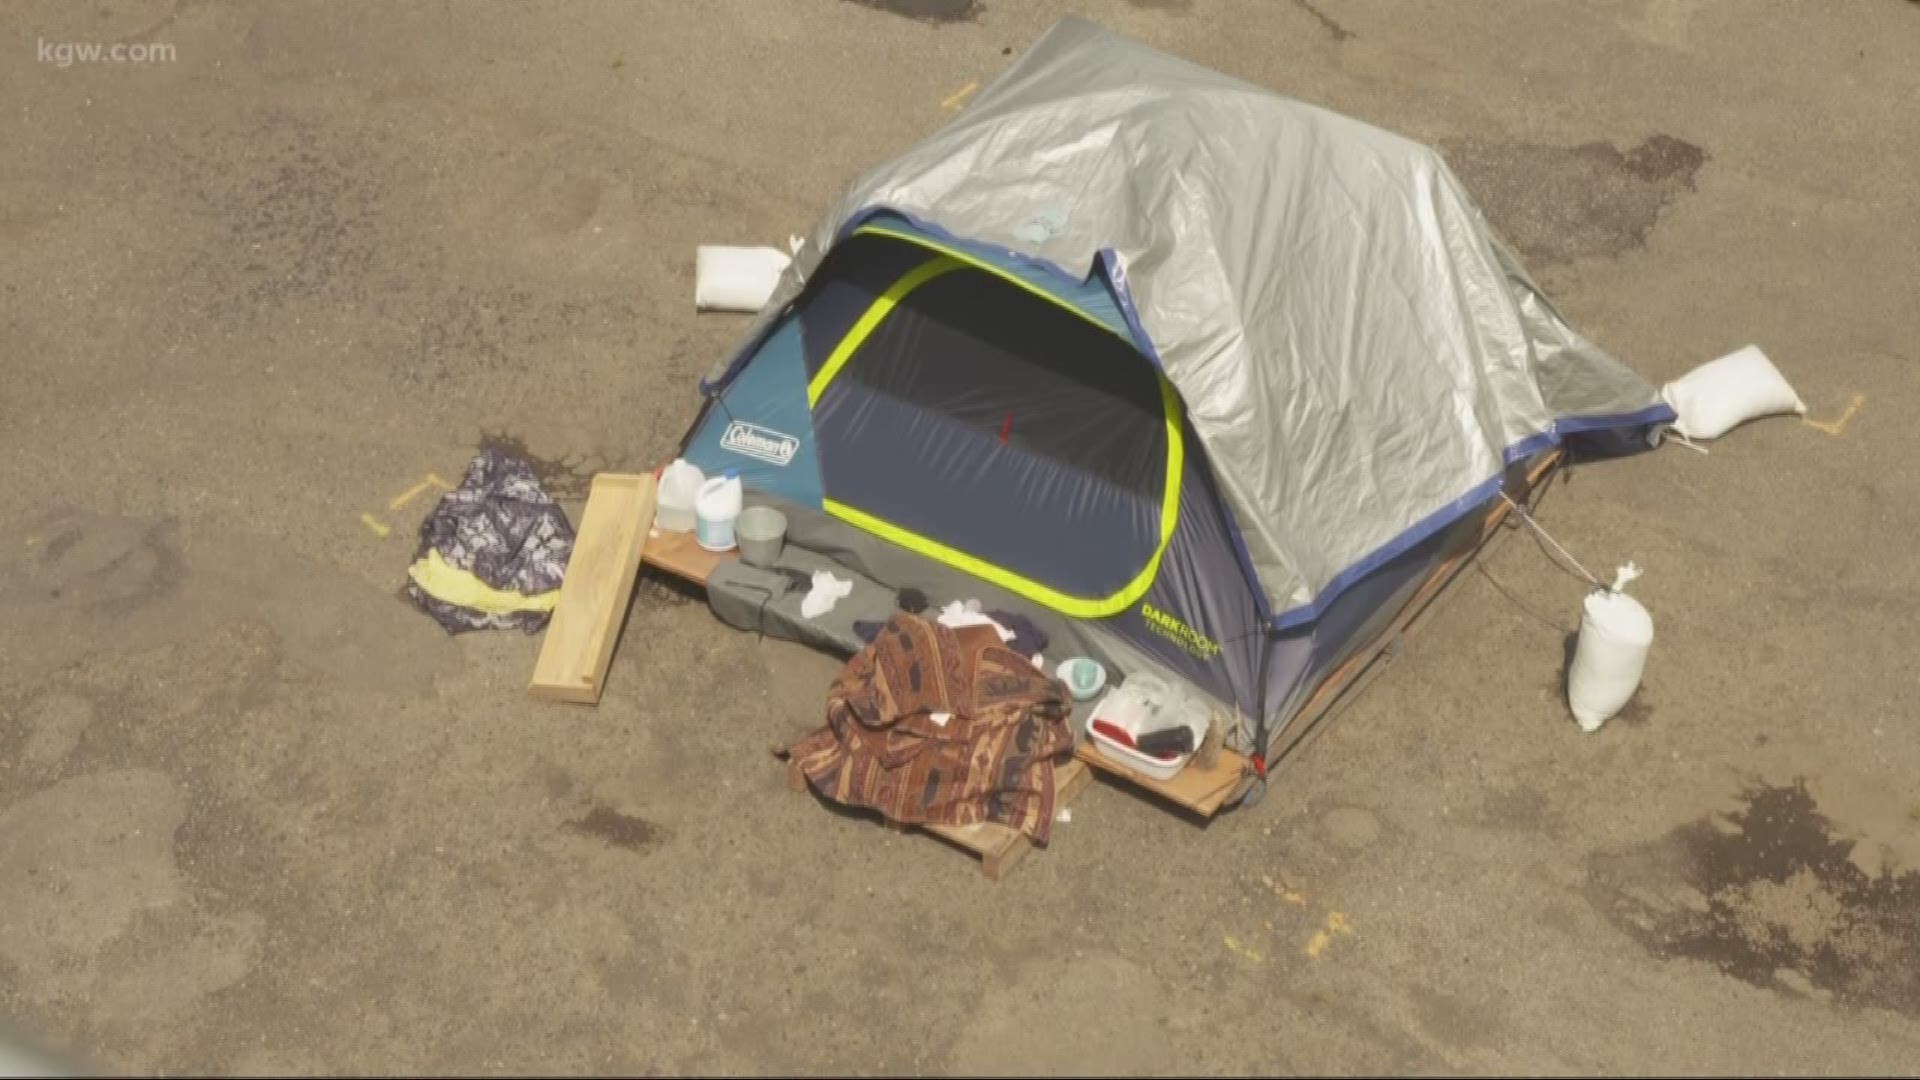 A low number of homeless people have tested positive for COVID-19 in the Portland area. Maggie Vespa reports.